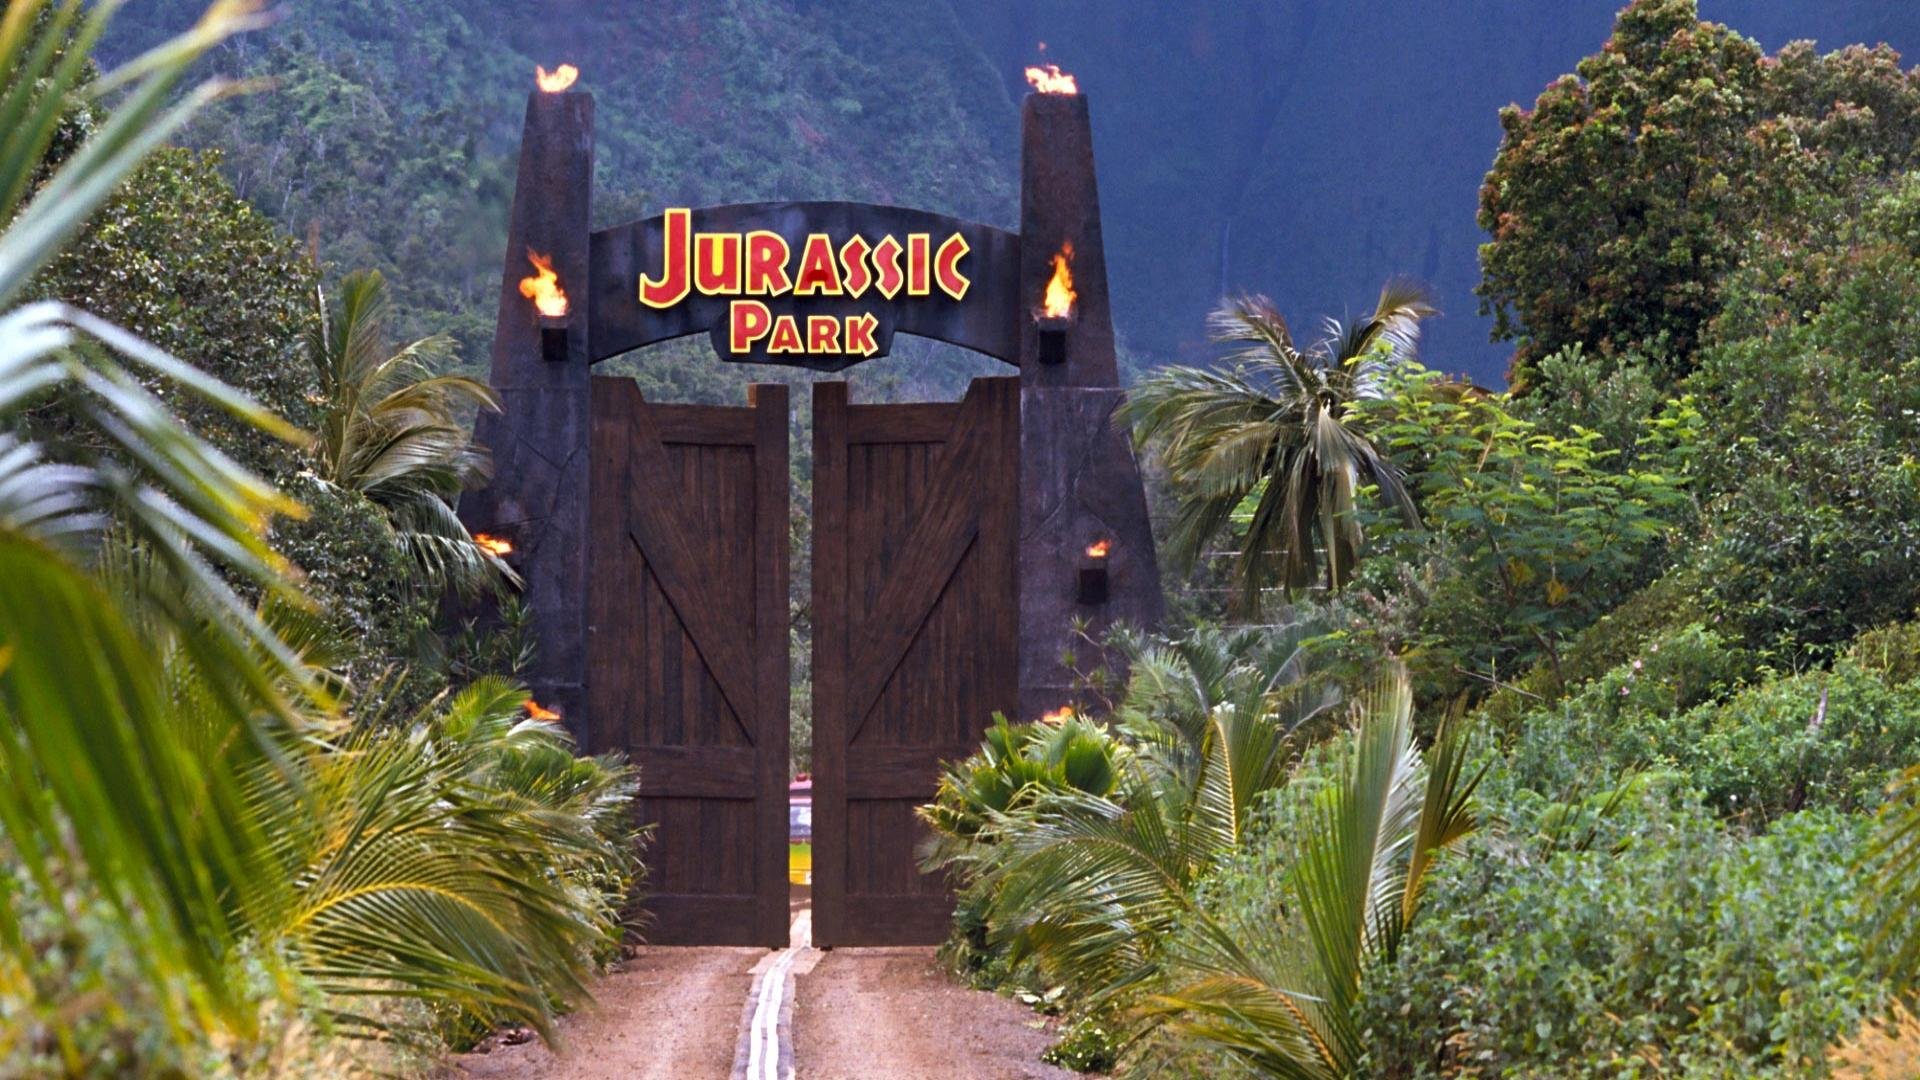 Download 1080p Jurassic Park computer background ID:447688 for free